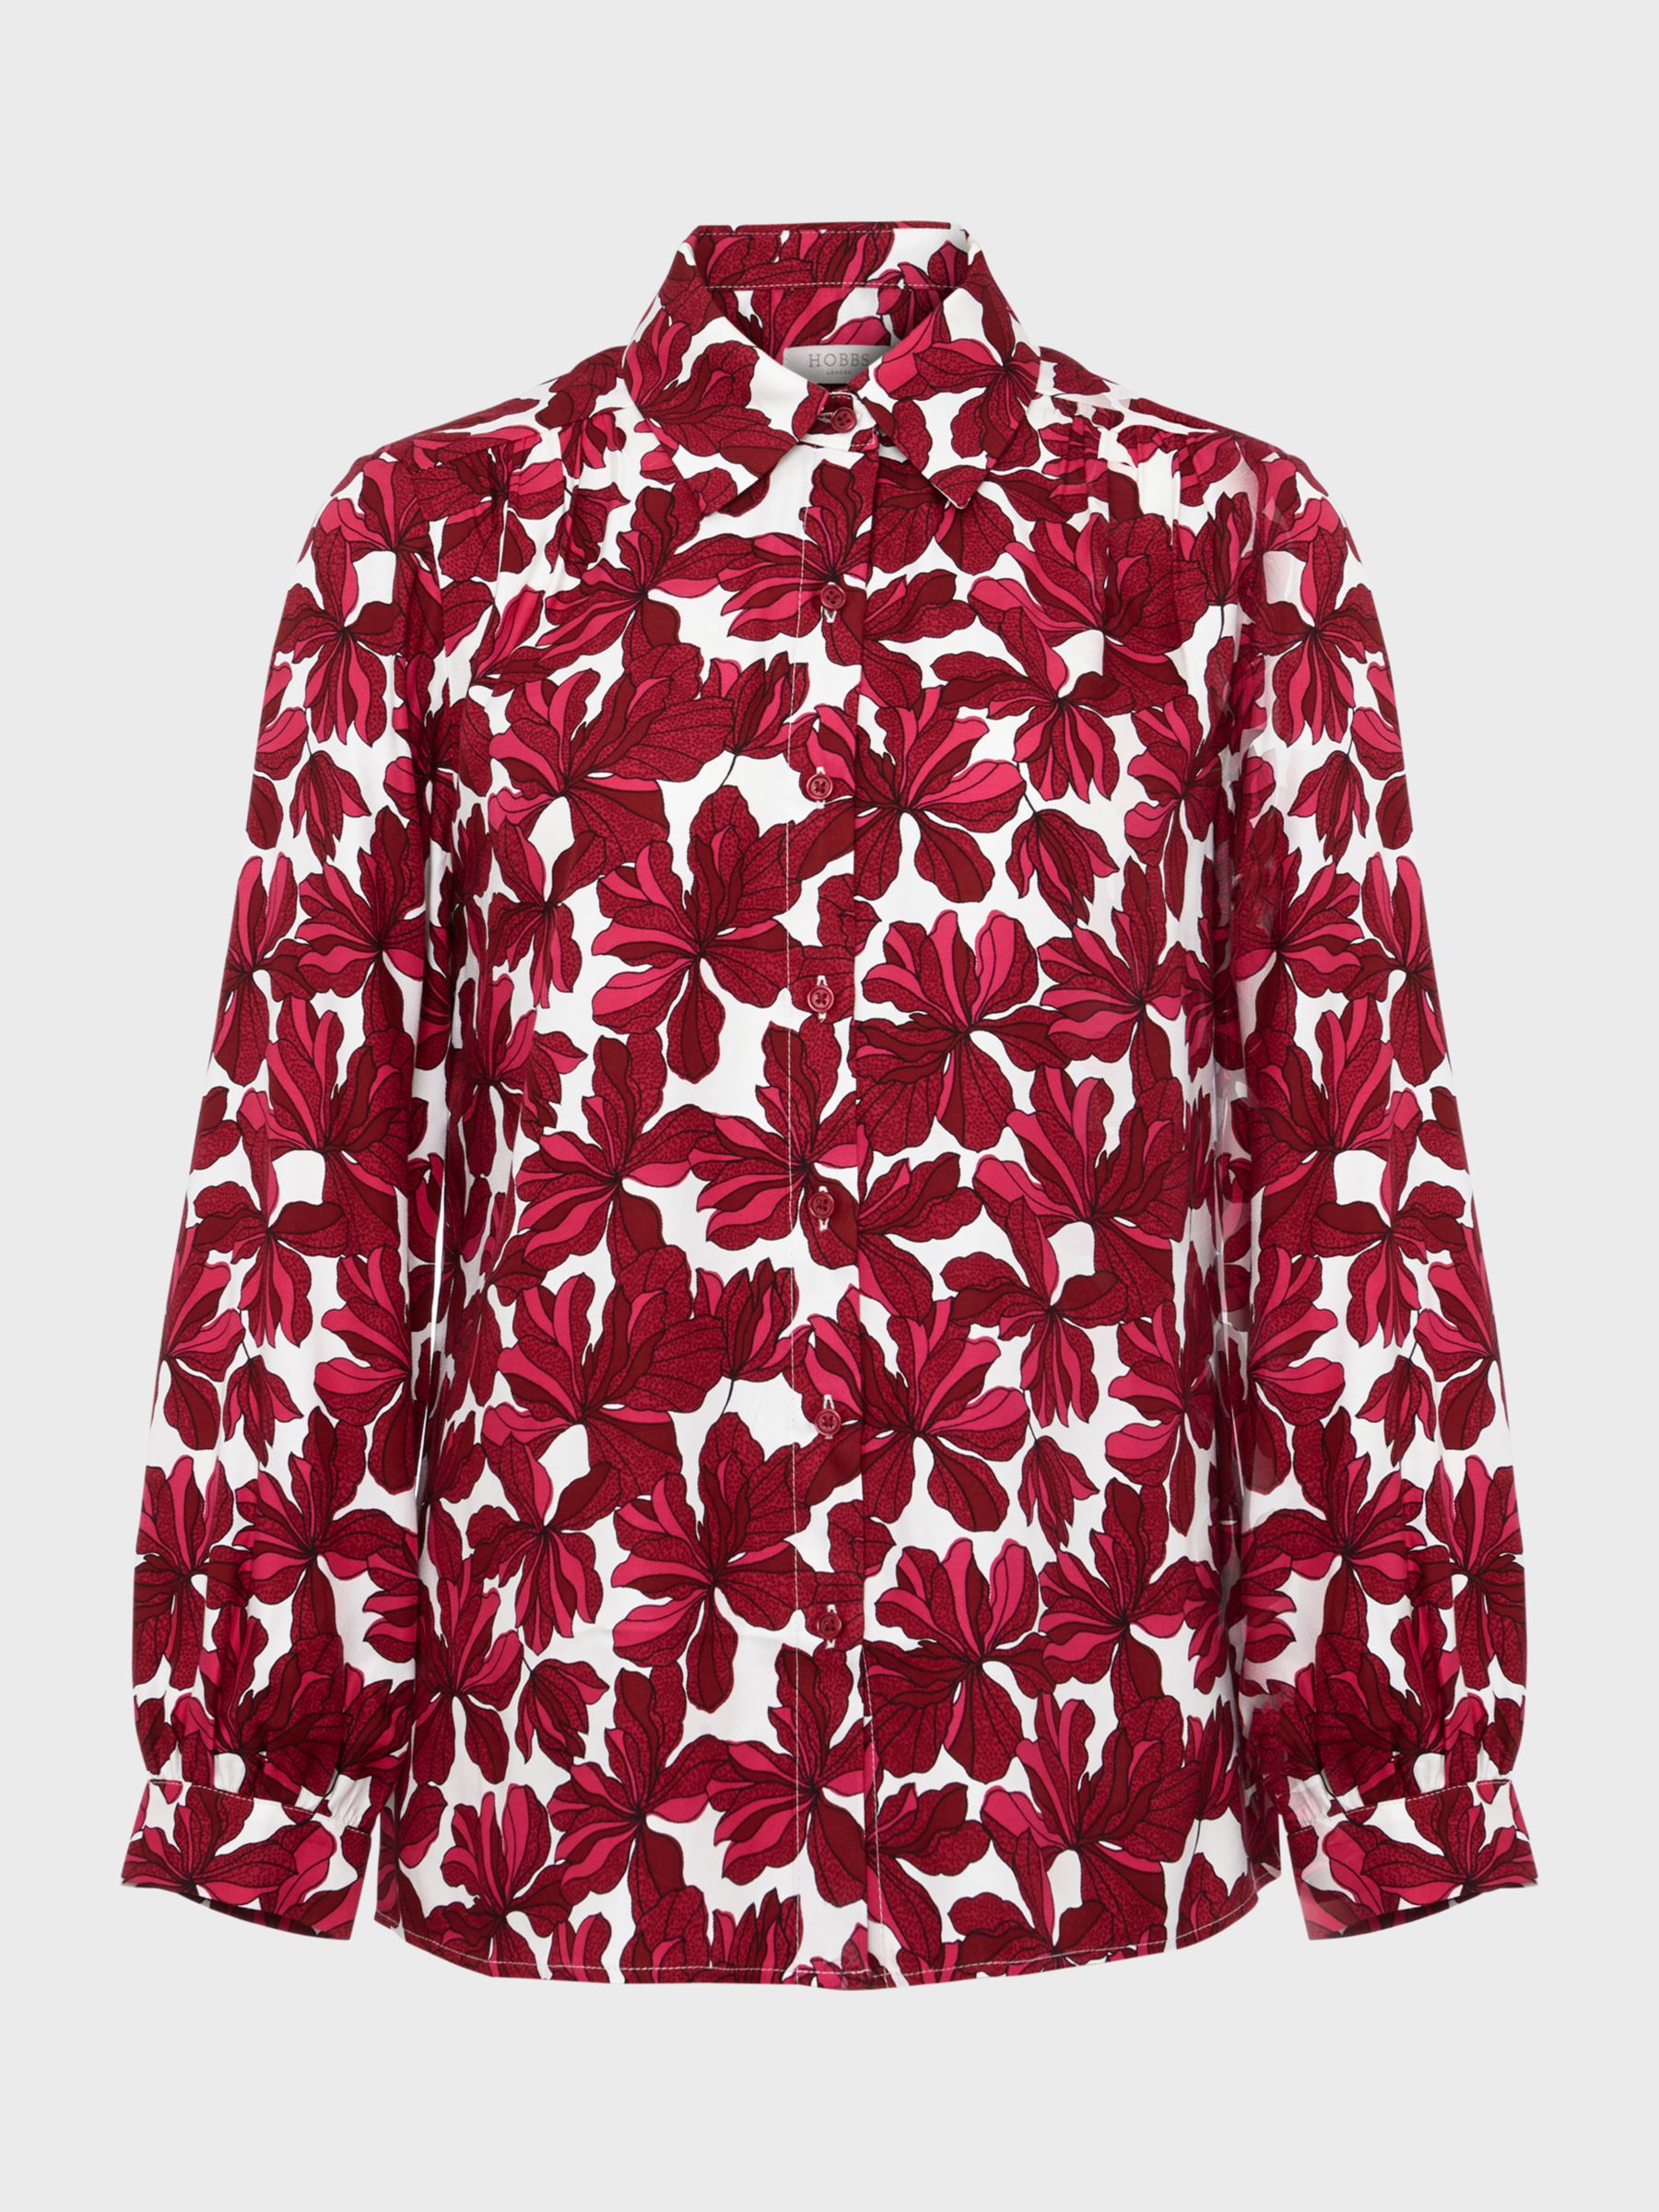 Hobbs Livia Ecovero Floral Blouse, Pink/Ivory at John Lewis & Partners